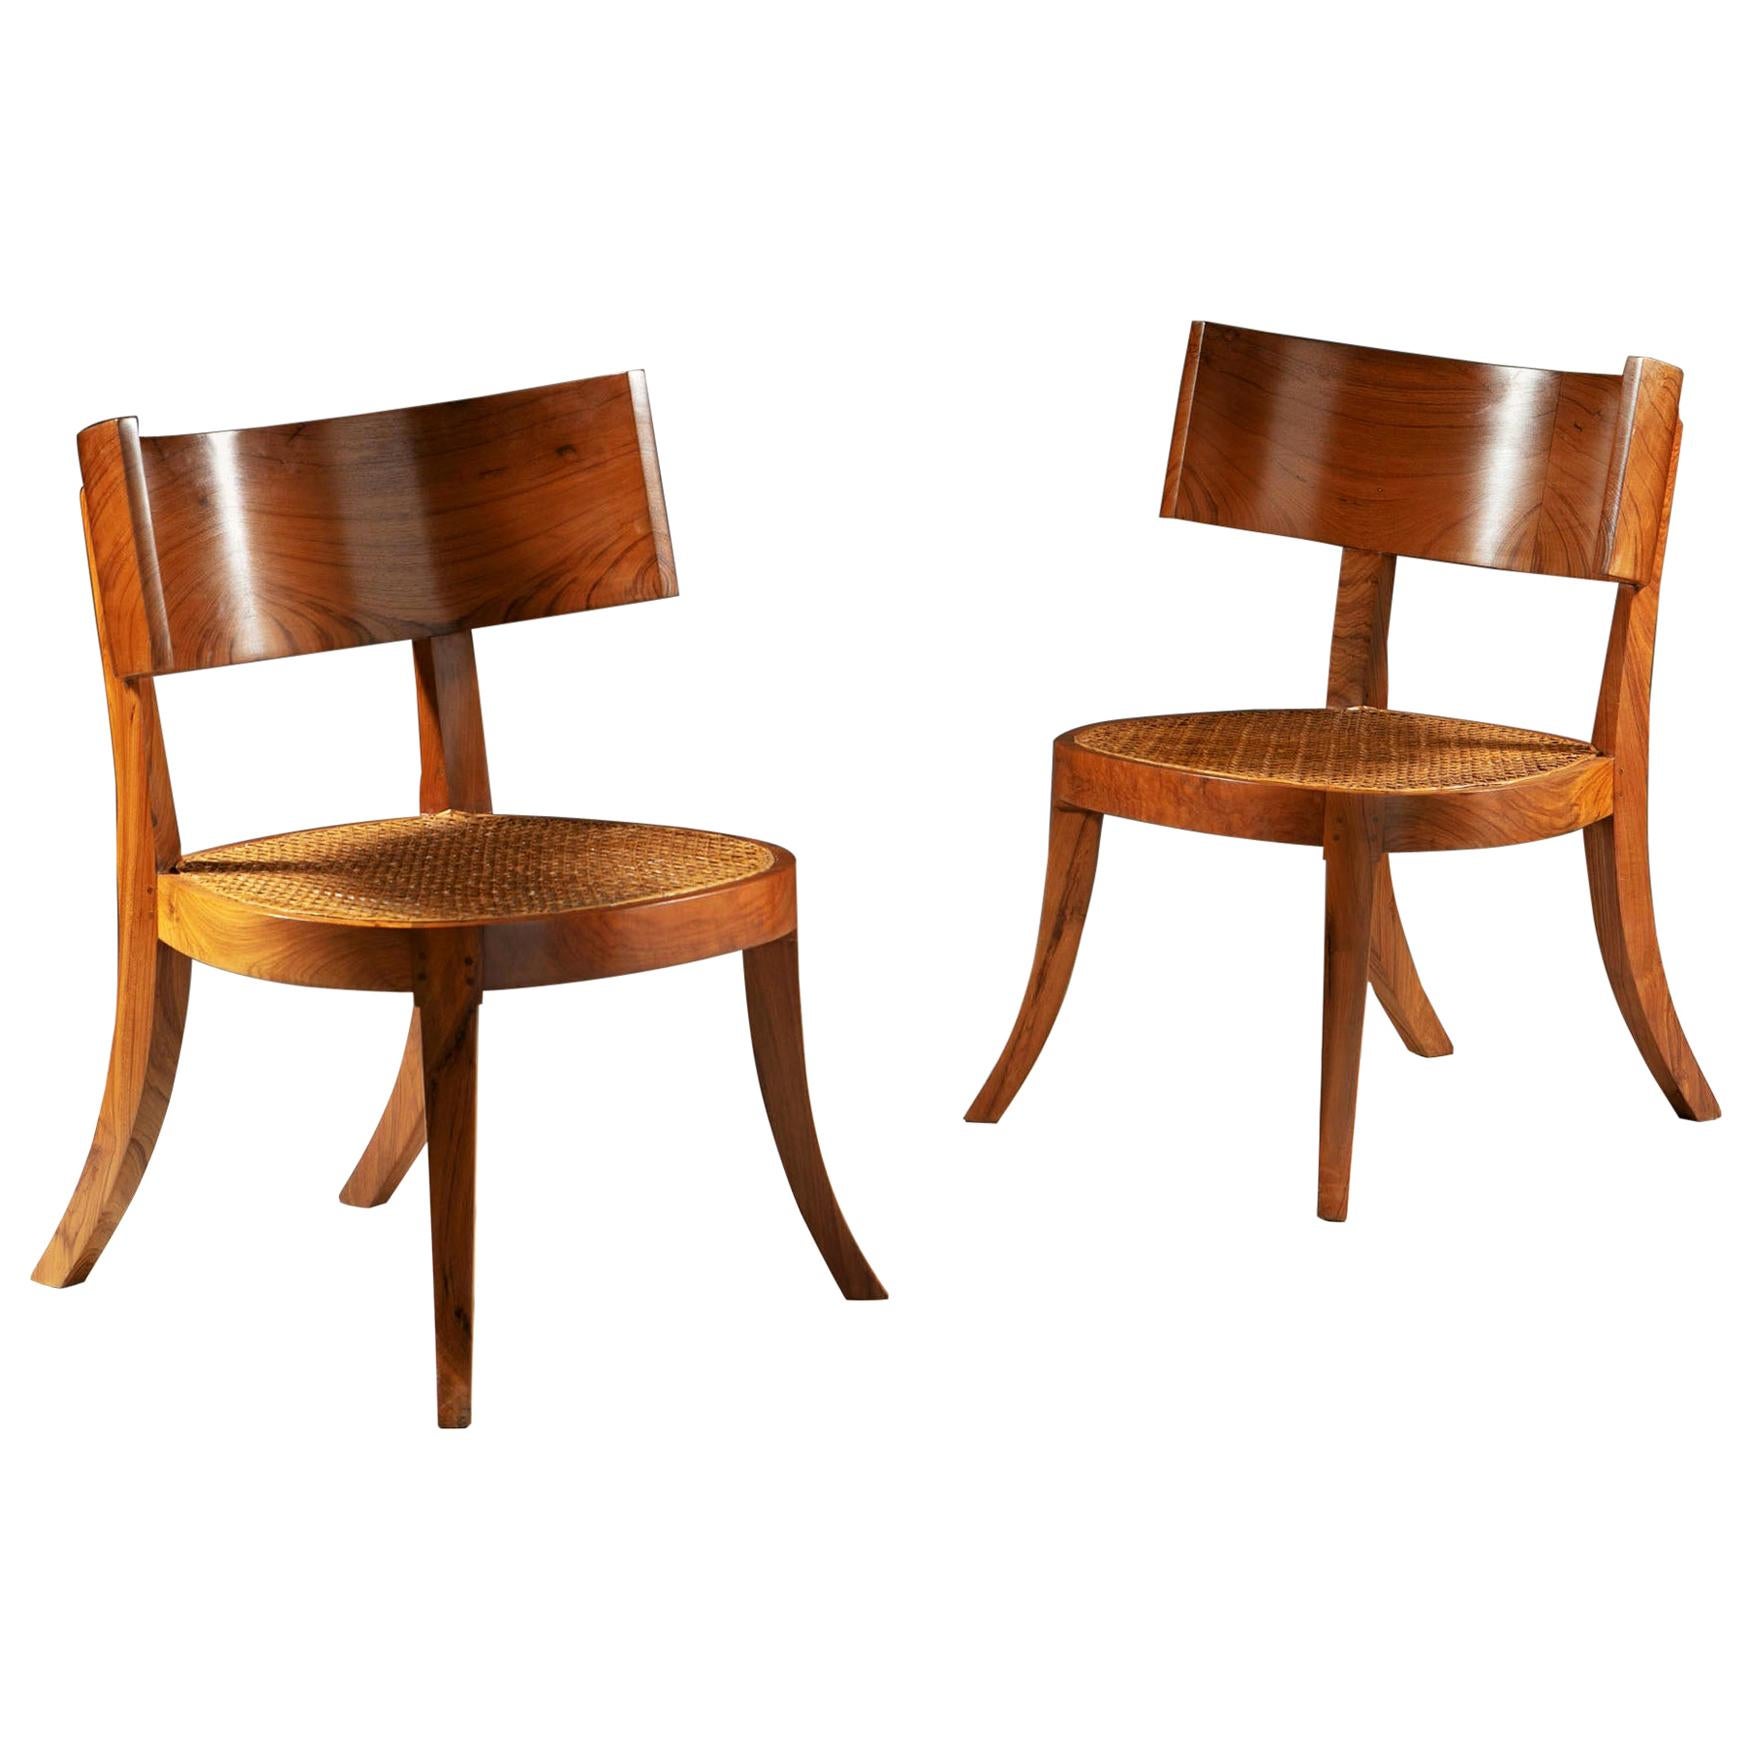 Pair of 20th Century Walnut Klismos Chairs with Caned Seats